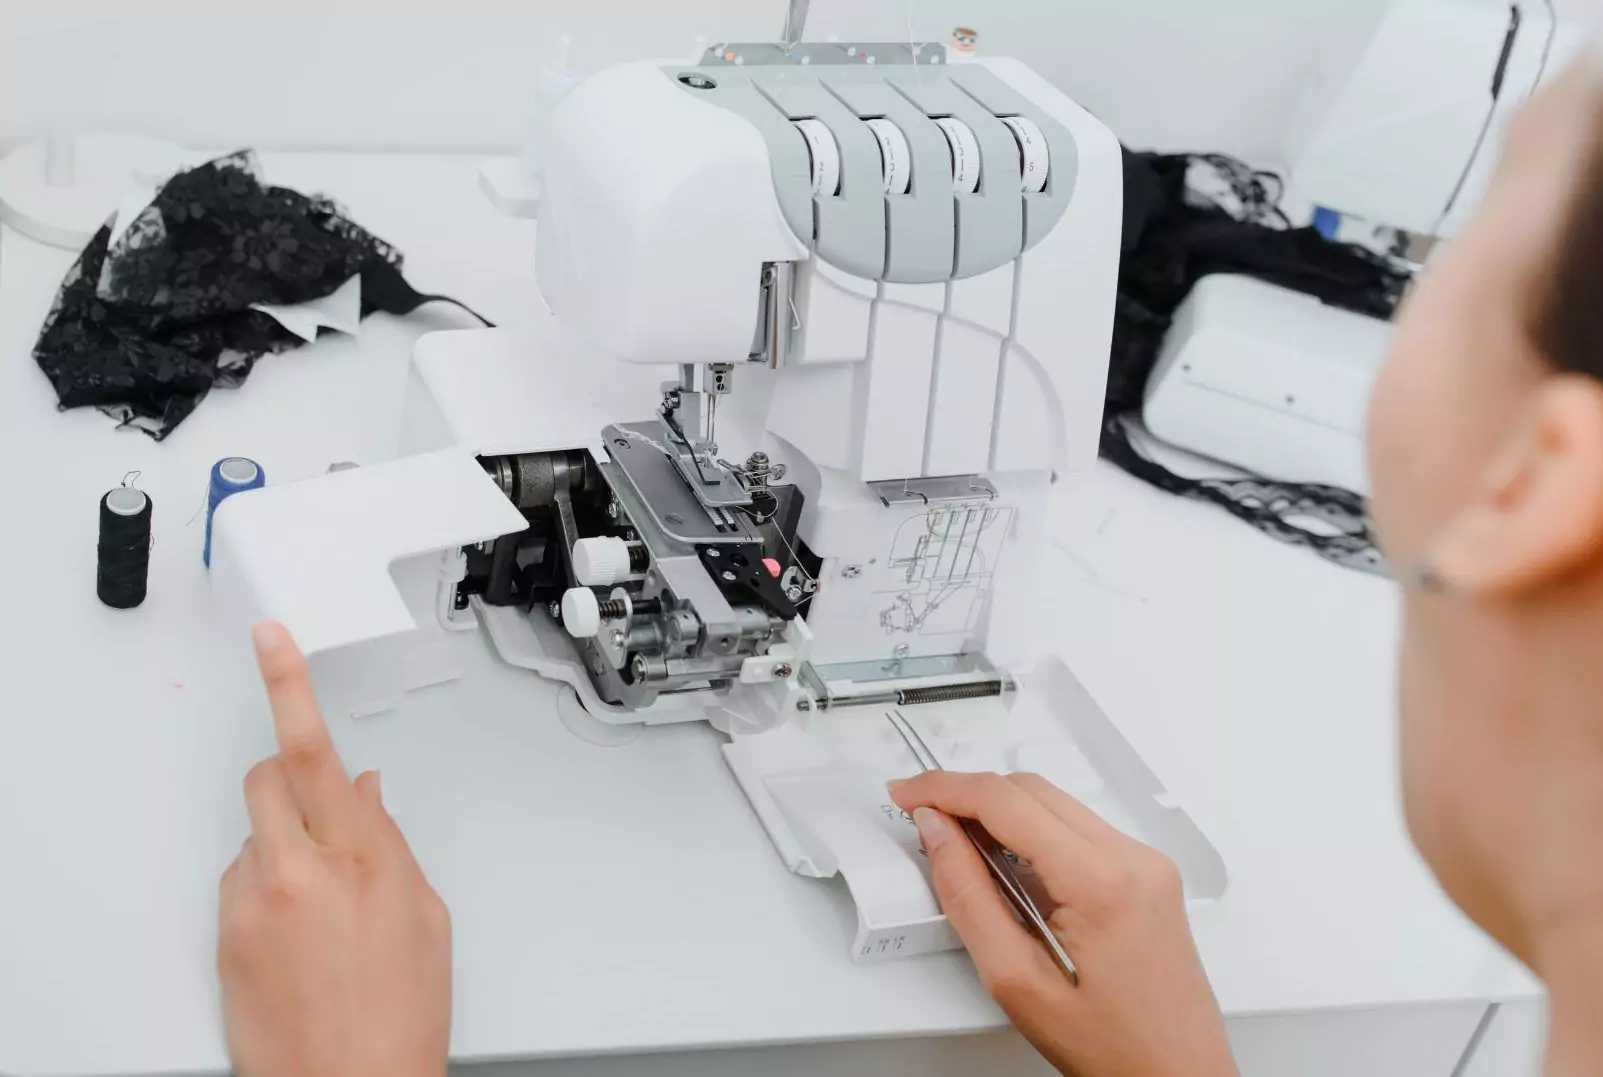 1:1 sewing lessons - get to know your overlocker